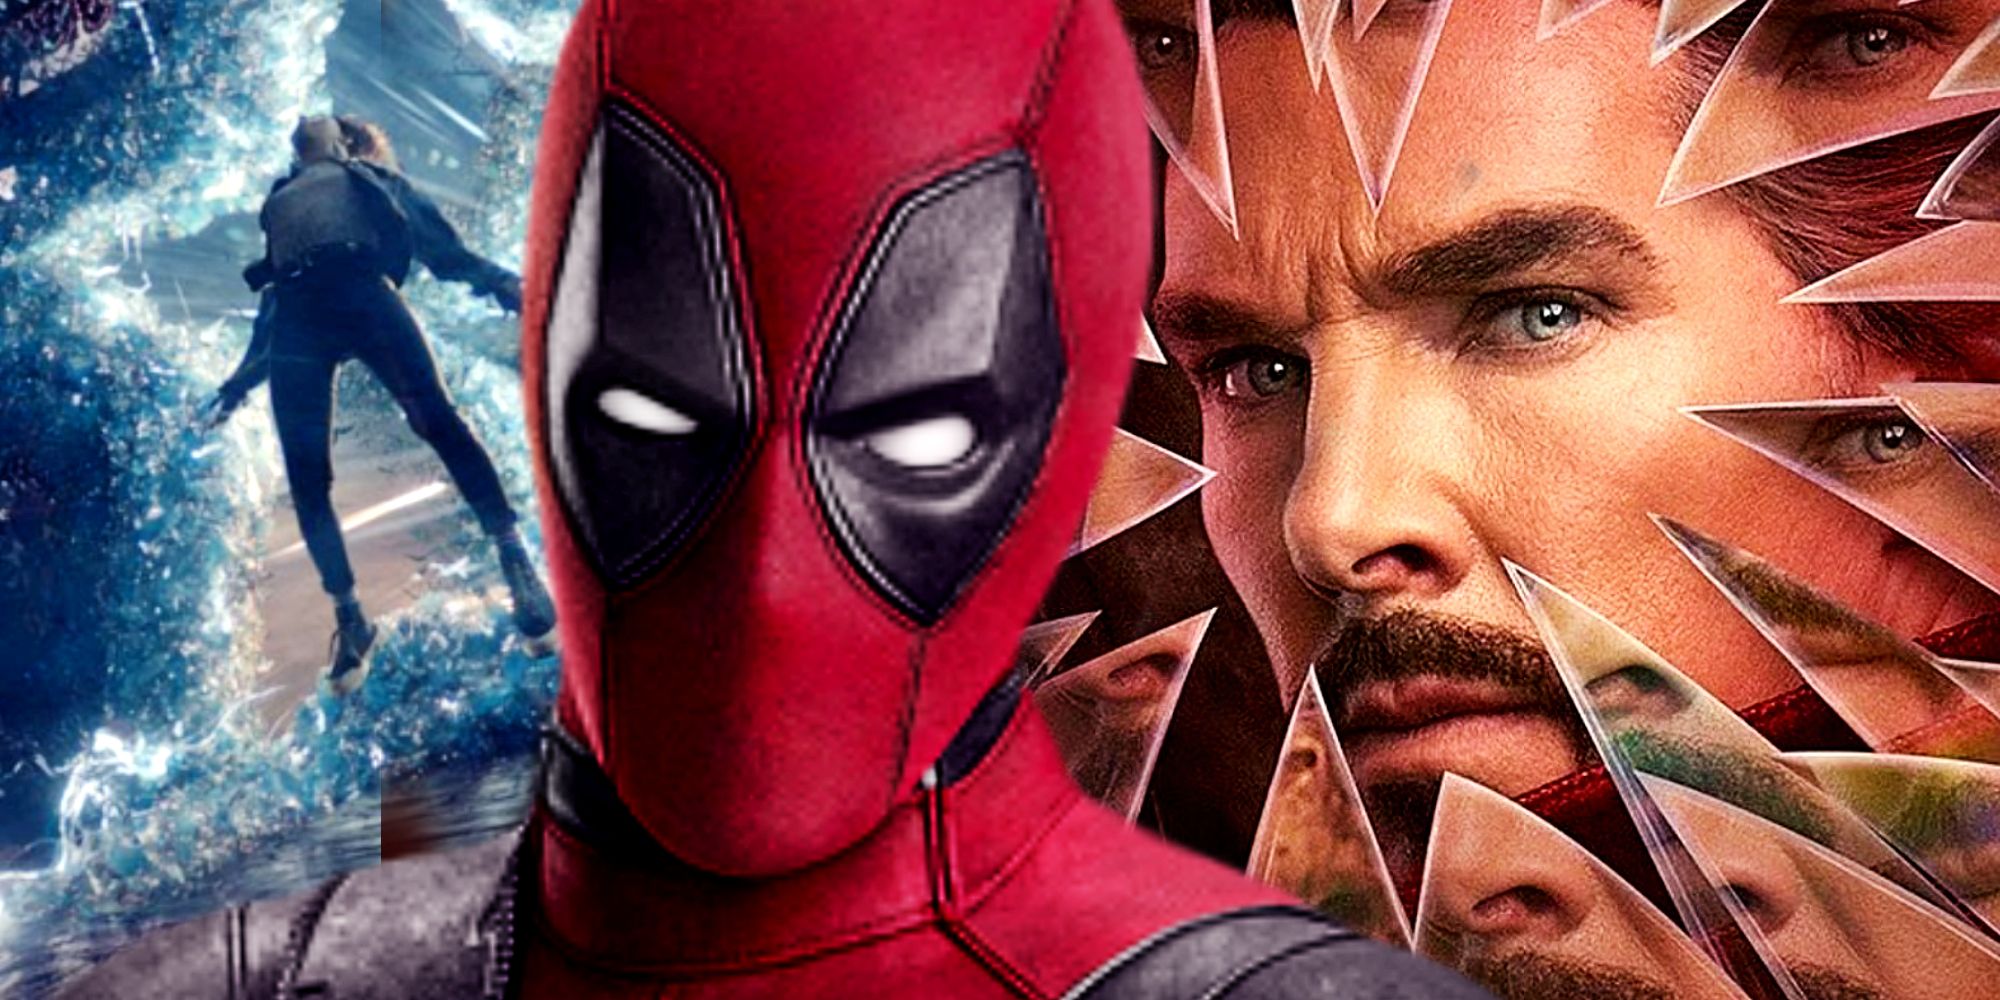 Deadpool and Doctor Strange in the Multiverse of Madness